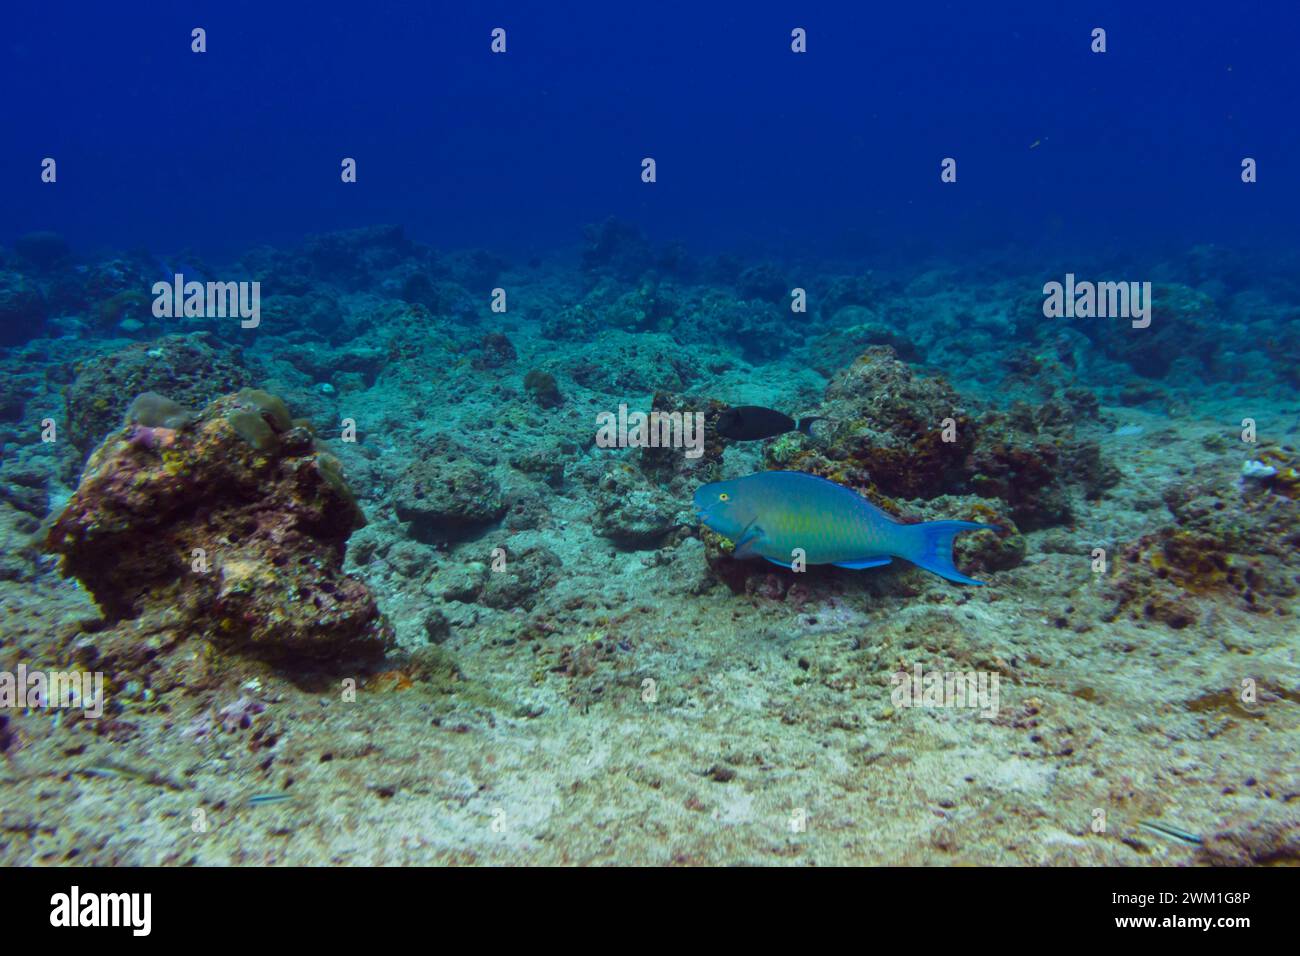 Rusty parrotfish (scaridae) in the coral reef of Maldives island. Tropical and coral sea wildelife. Beautiful underwater world. Underwater photography Stock Photo